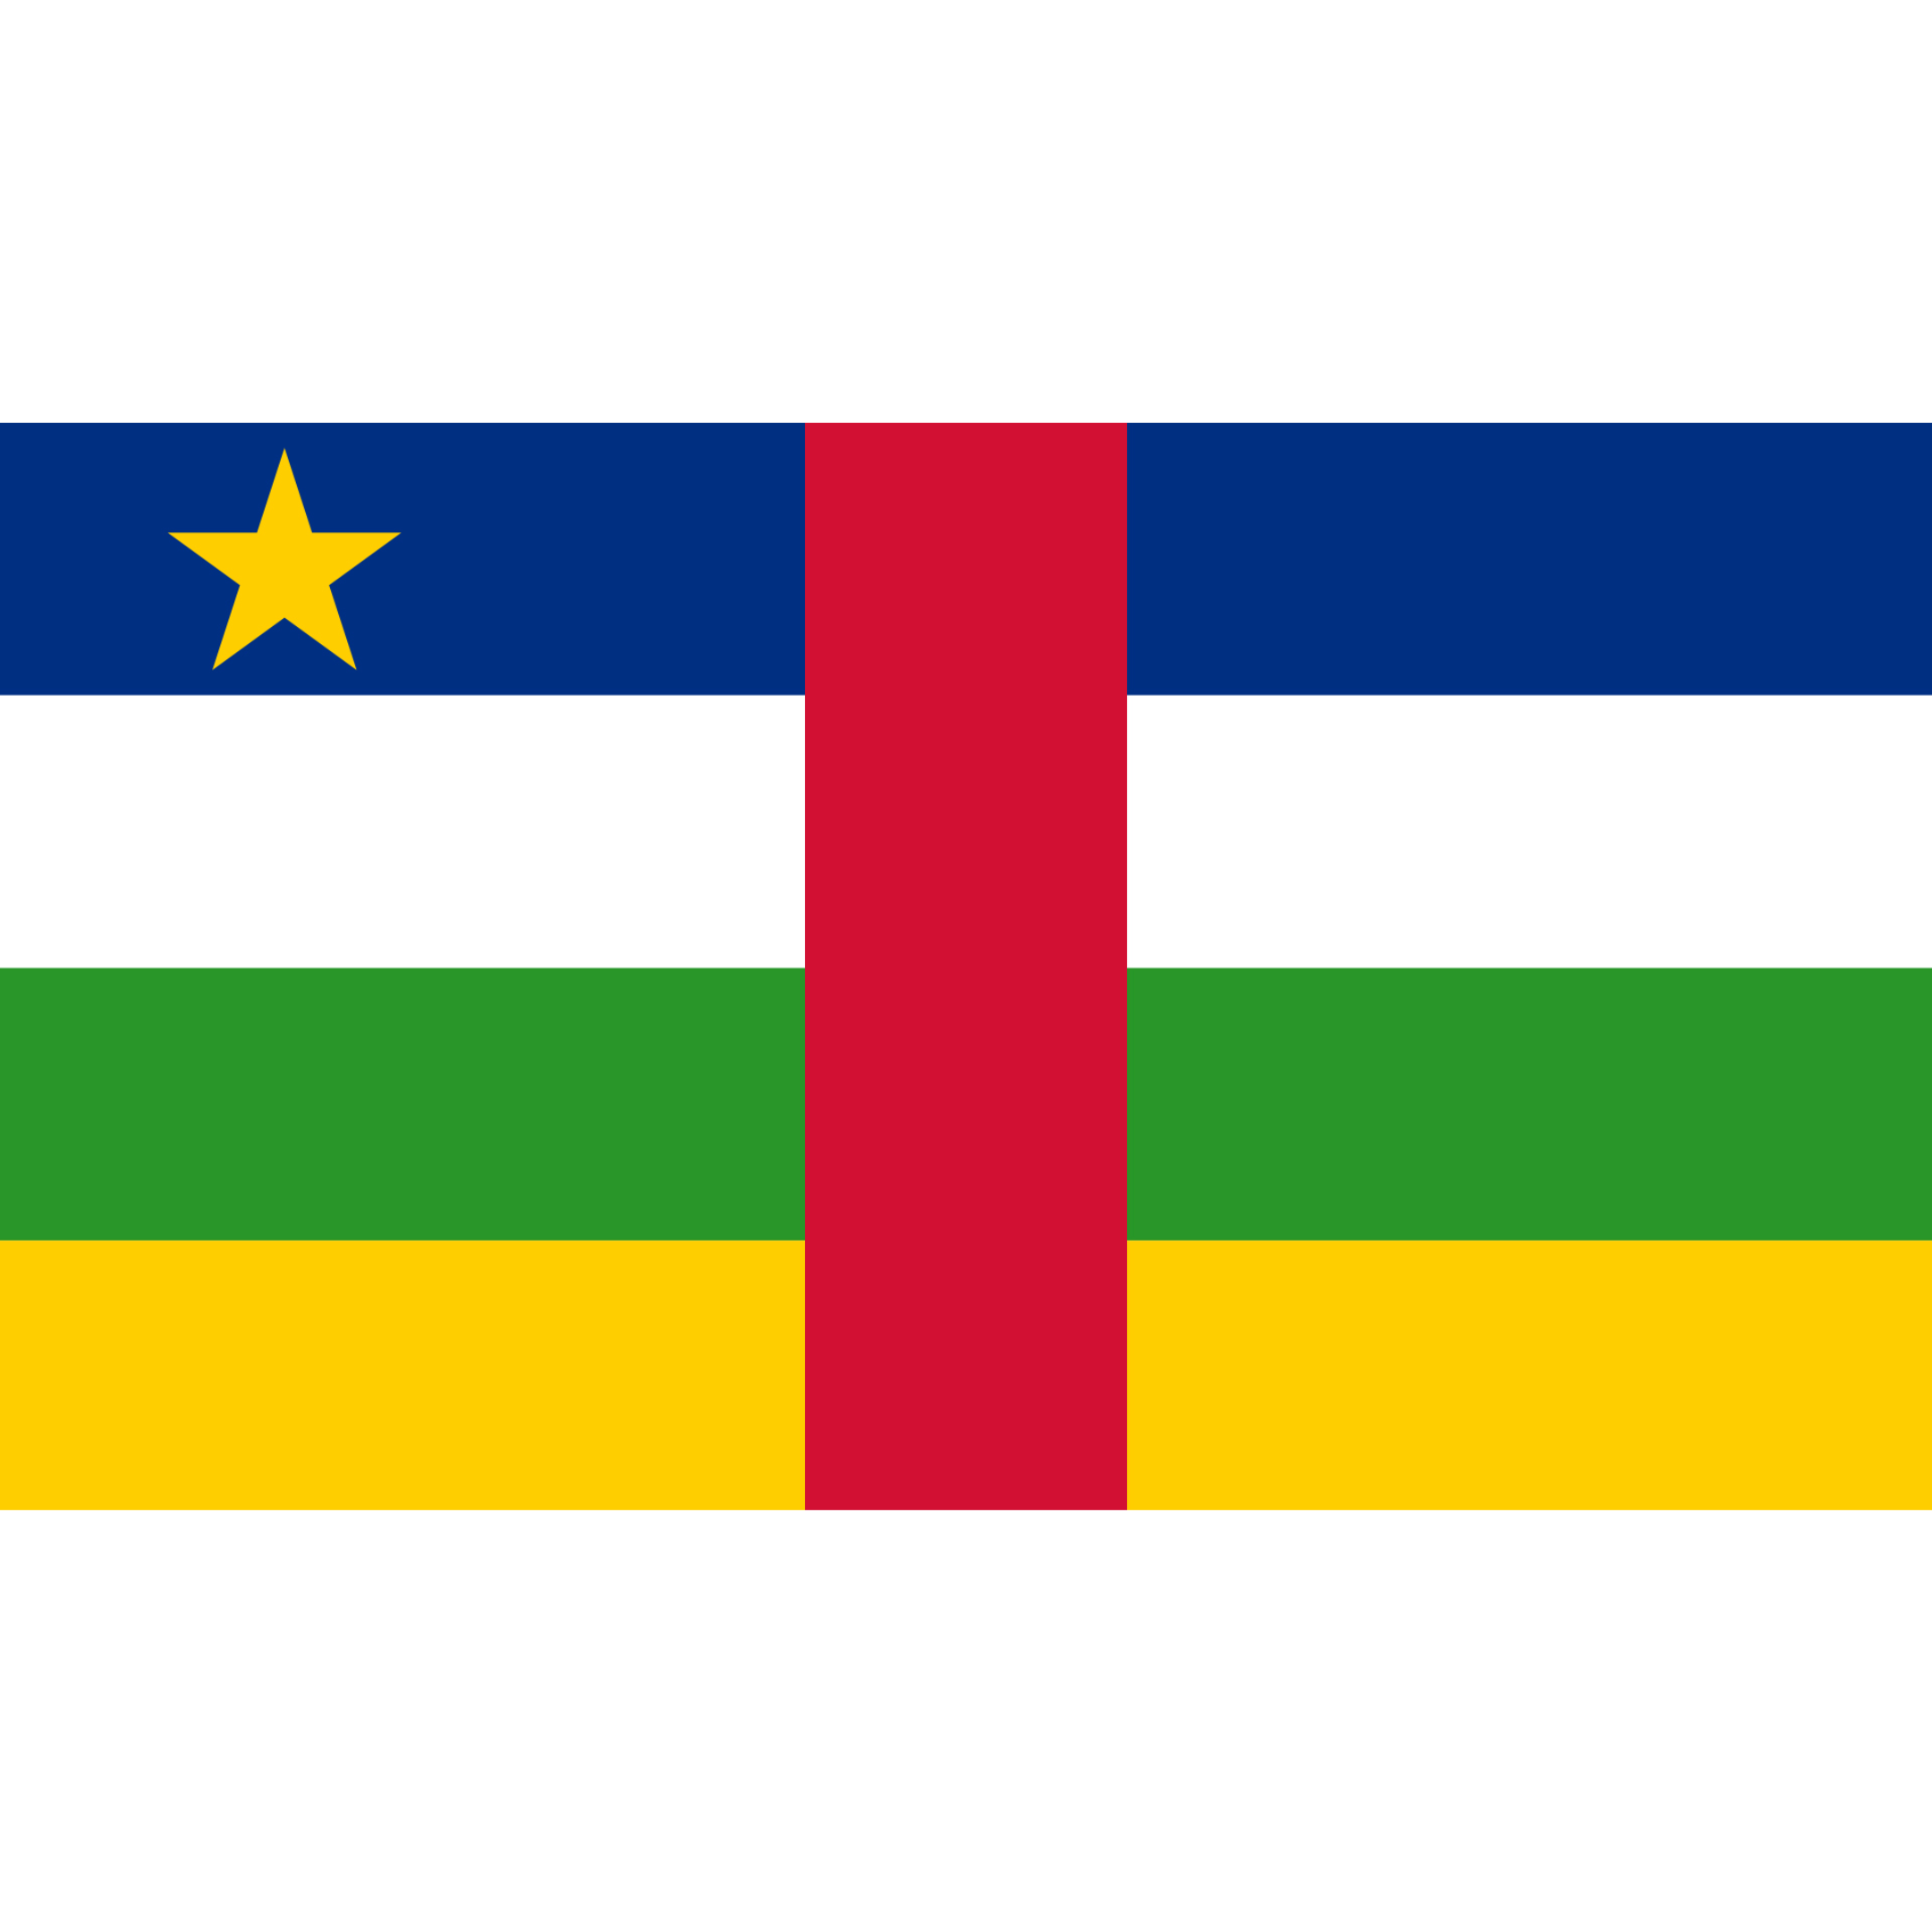 Central African Republic's flag has blue, white, green and yellow horizontal bands, a red vertical band and a yellow star.